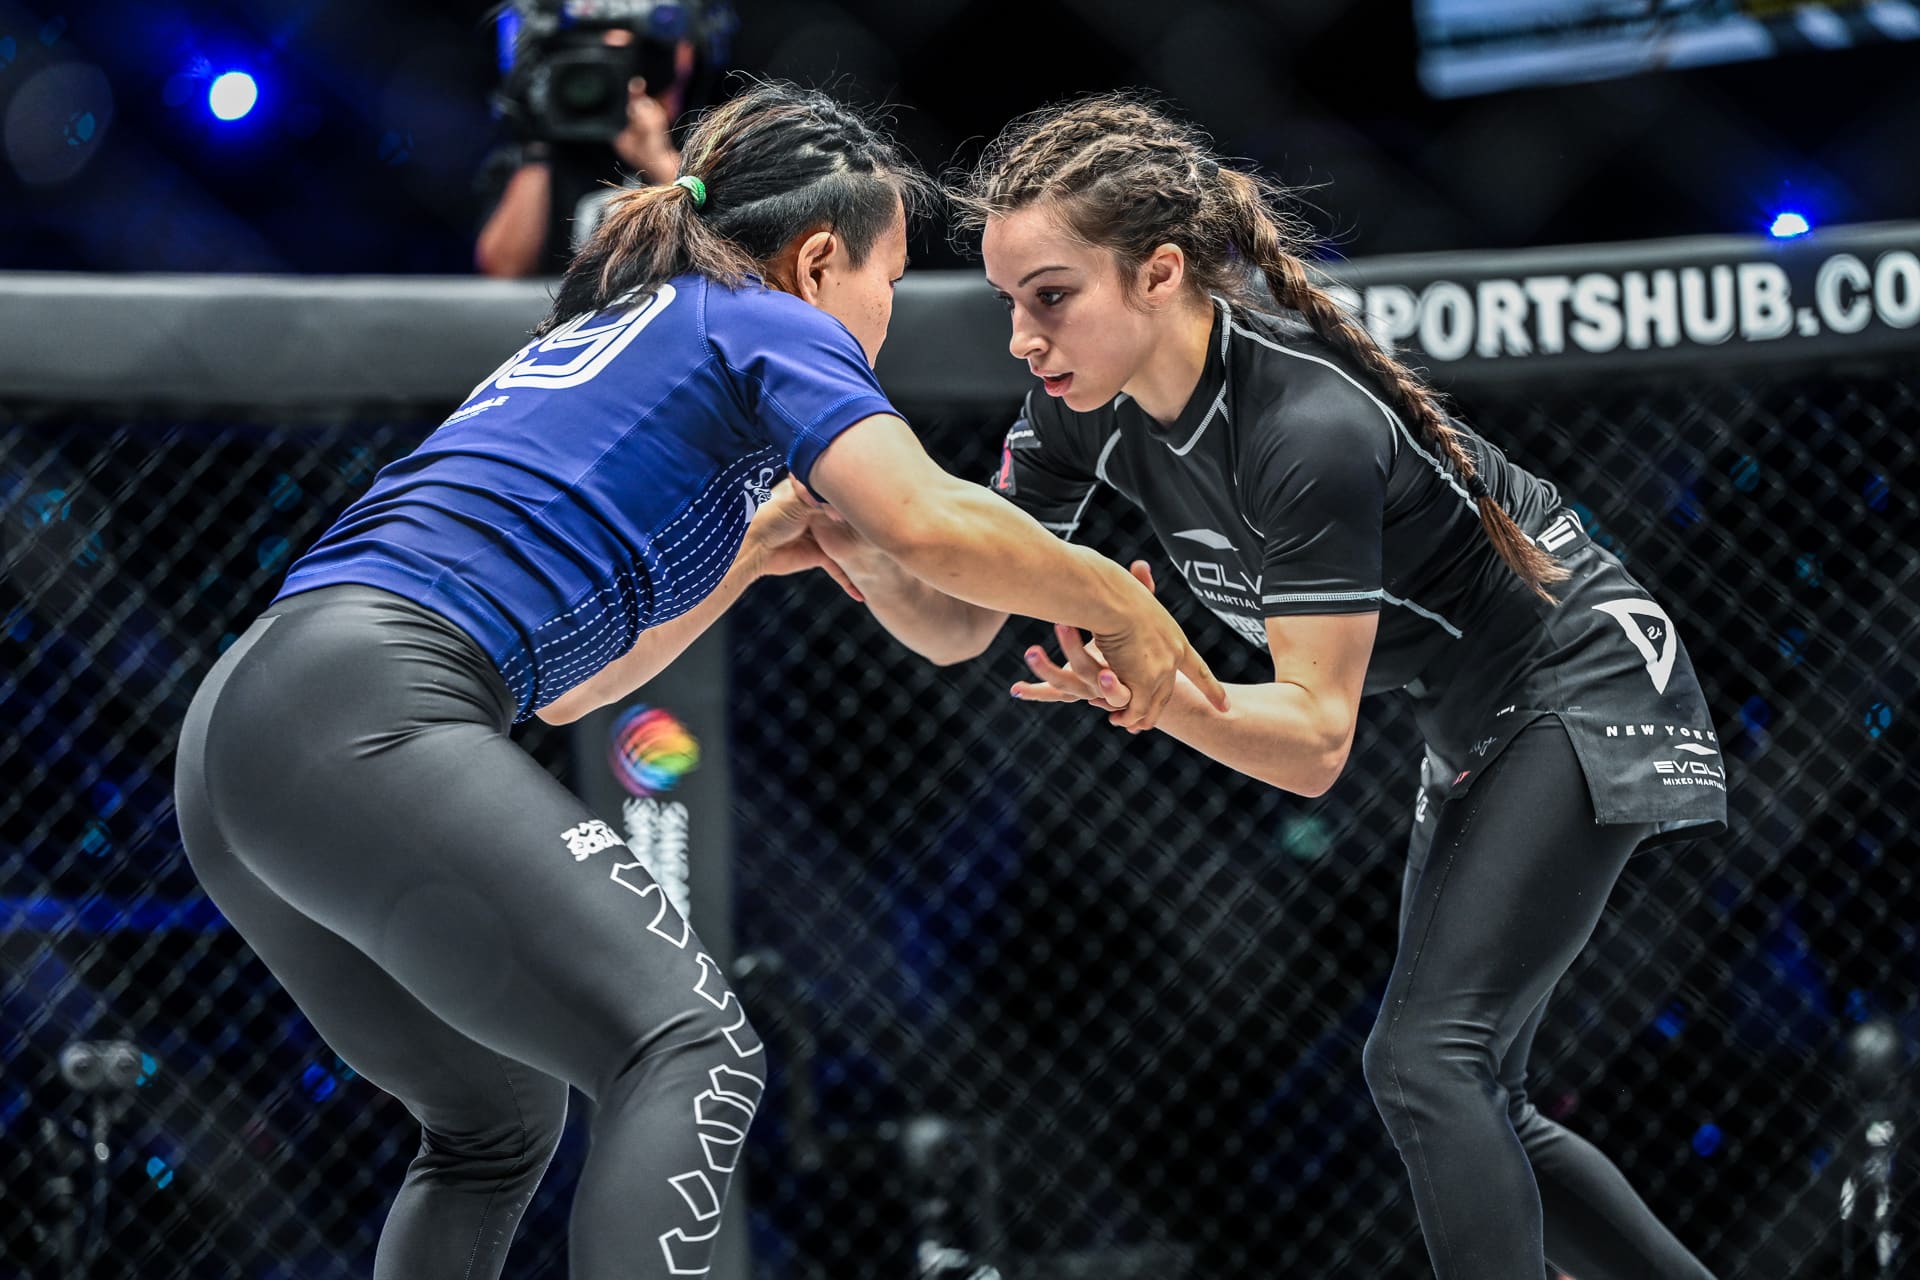 ONE Championship’s Submission Grappling Queen Danielle Kelly And Her Potential Jump To MMA